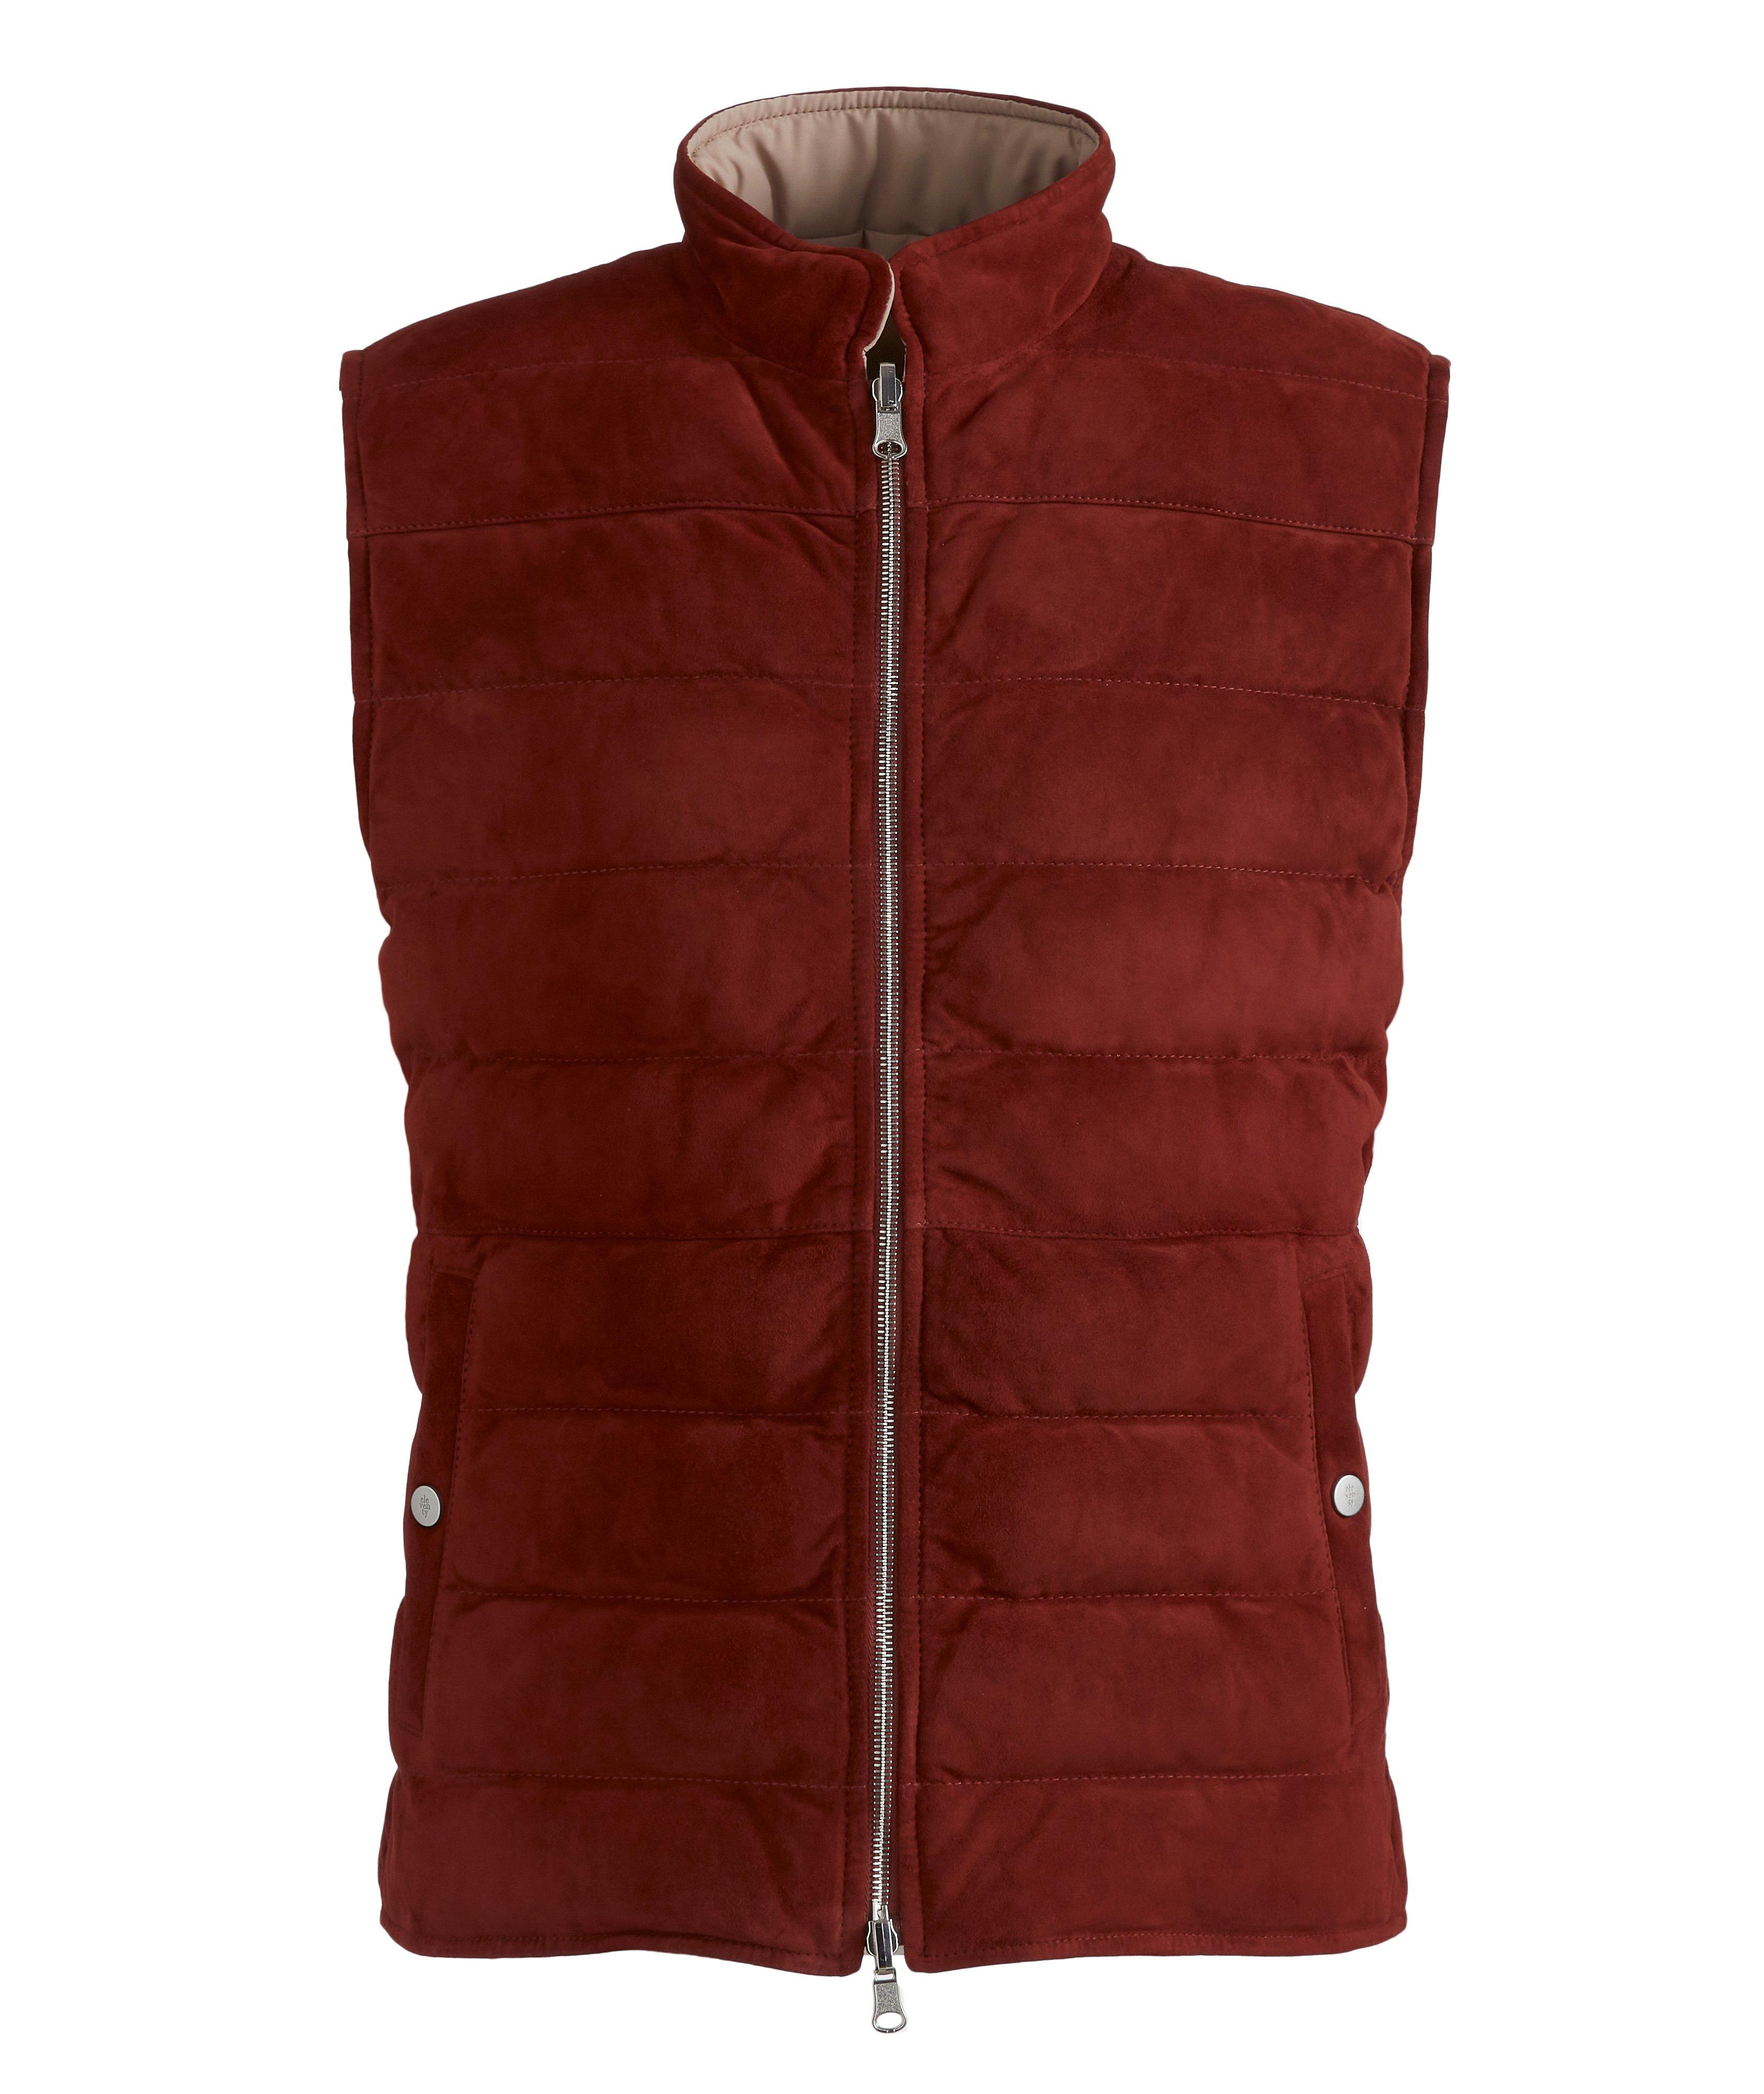 Reversible Suede Puffer Vest image 0